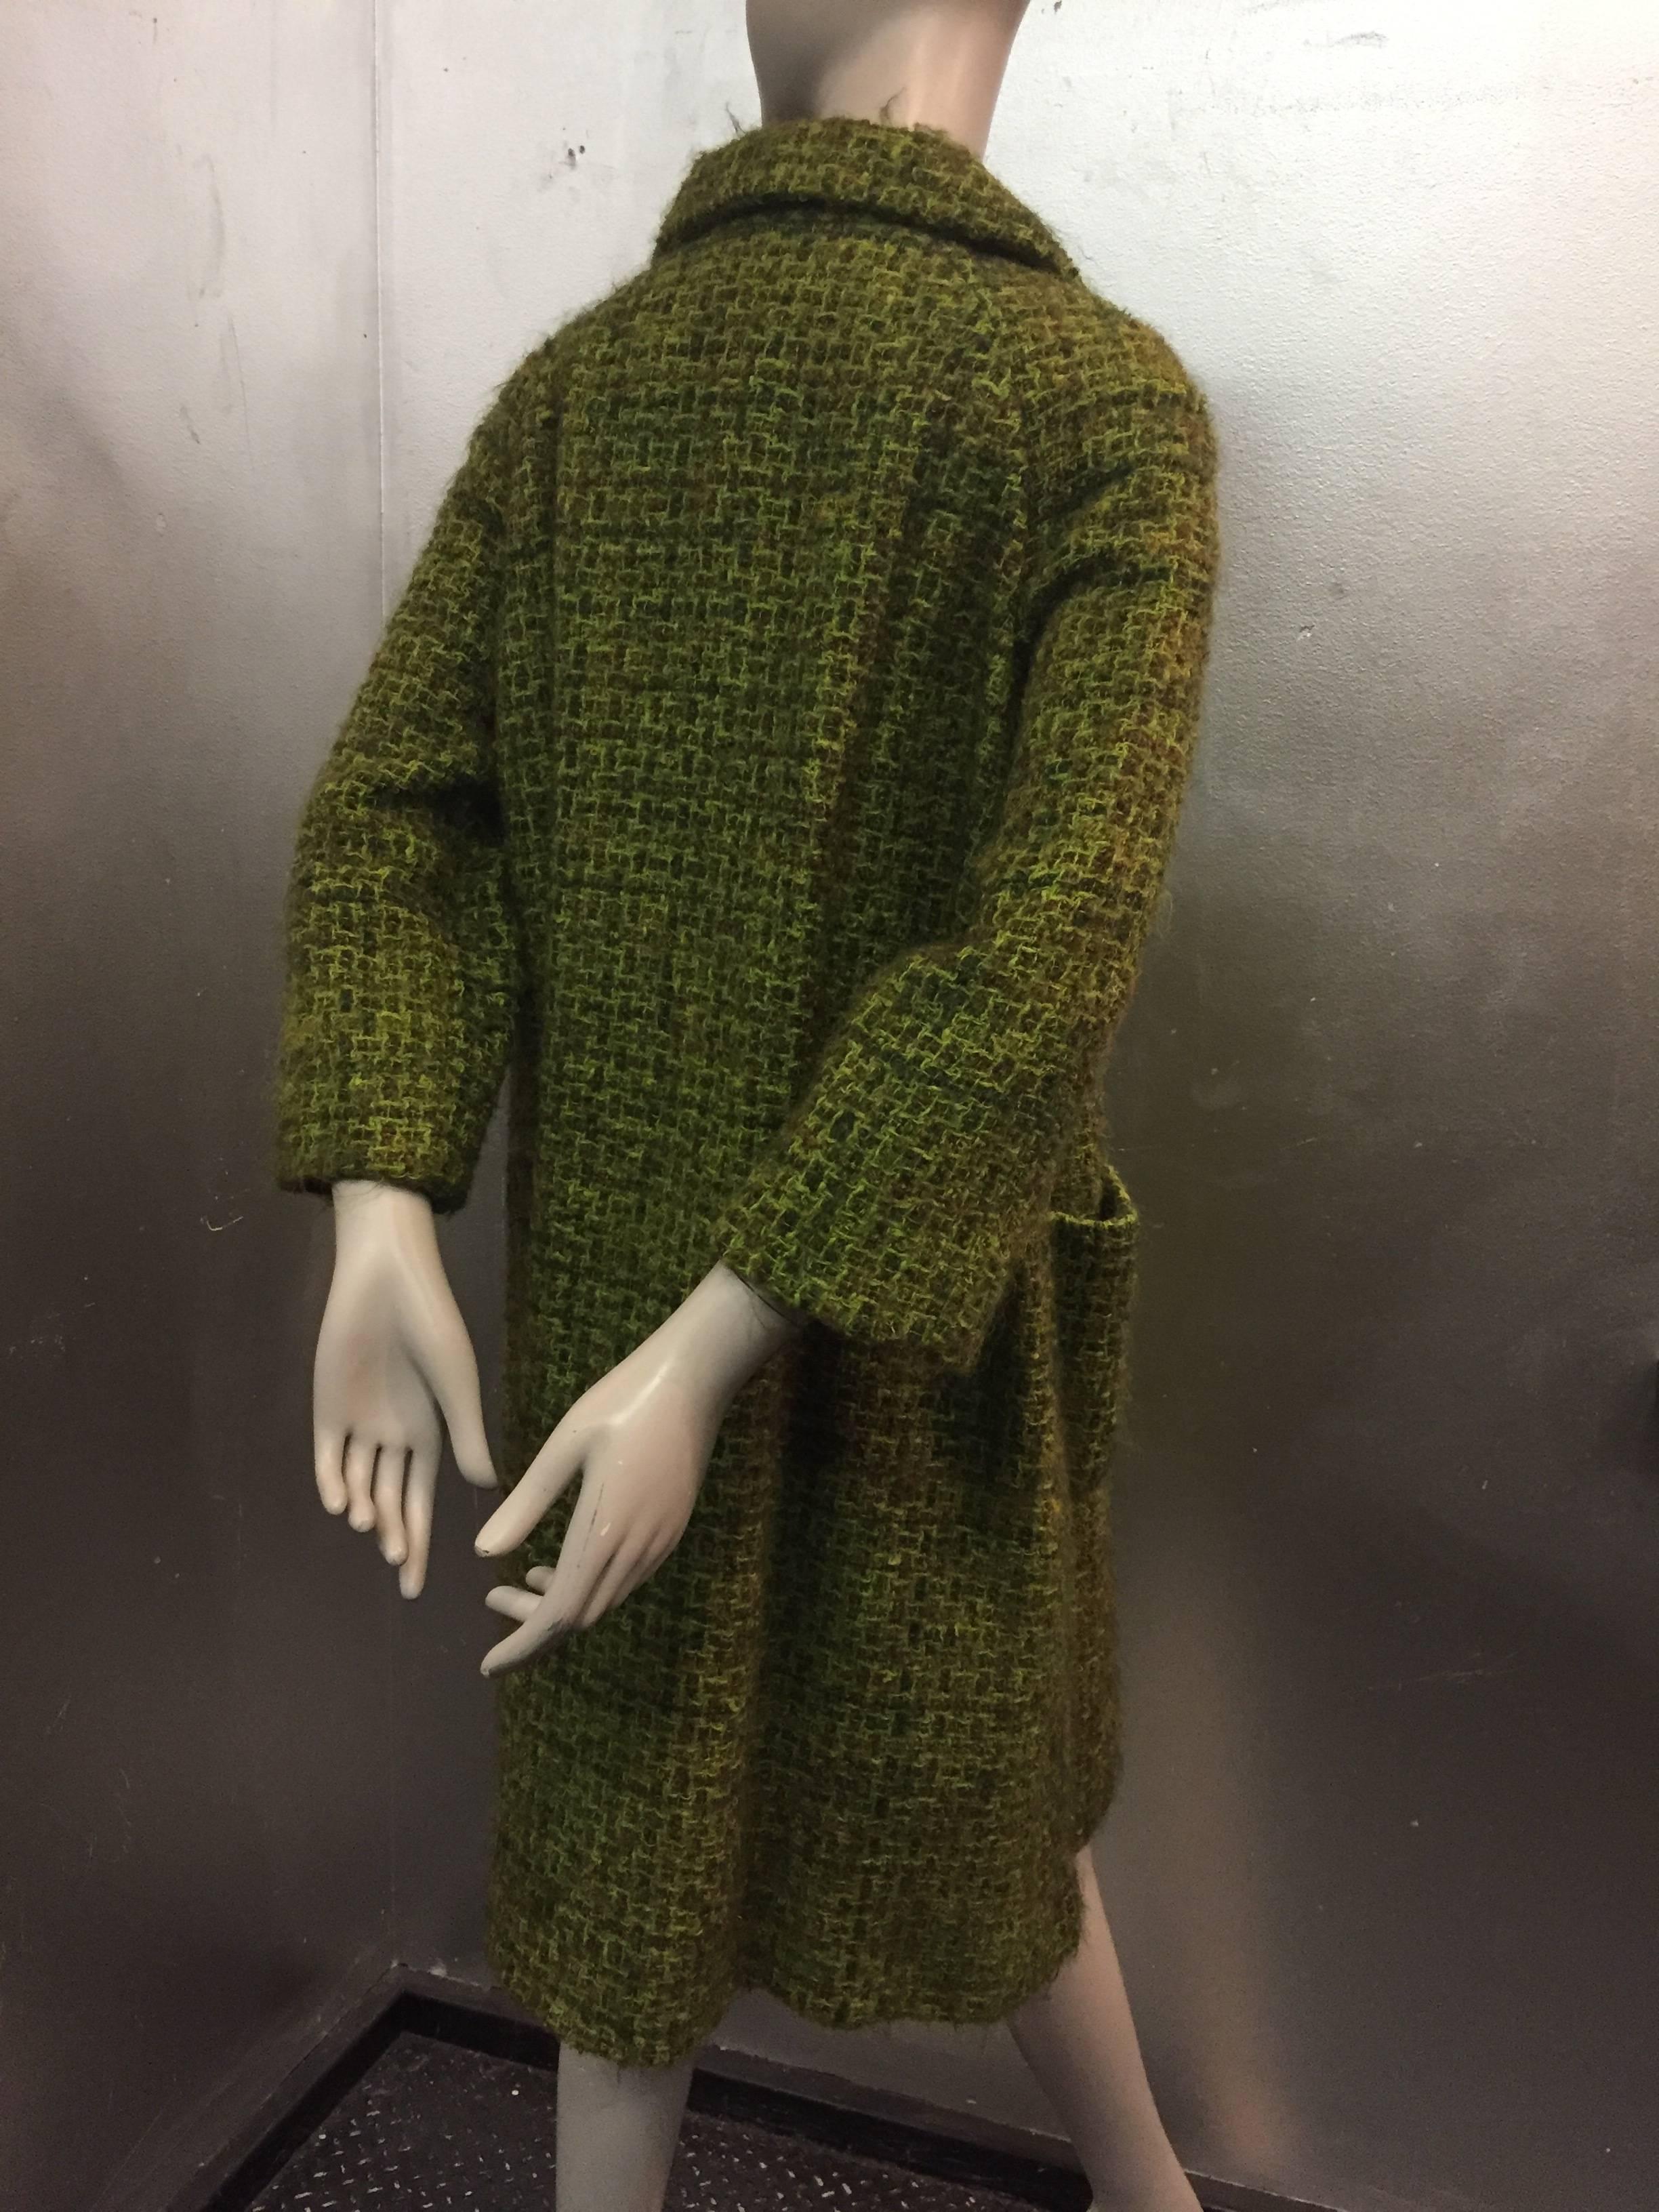 This coat features a full back, 3/4 length sleeve and stylized collar.

Outer pouch pockets and coordinating buttons.

Full green silk lining.

Perfect Mod style for Fall! 
